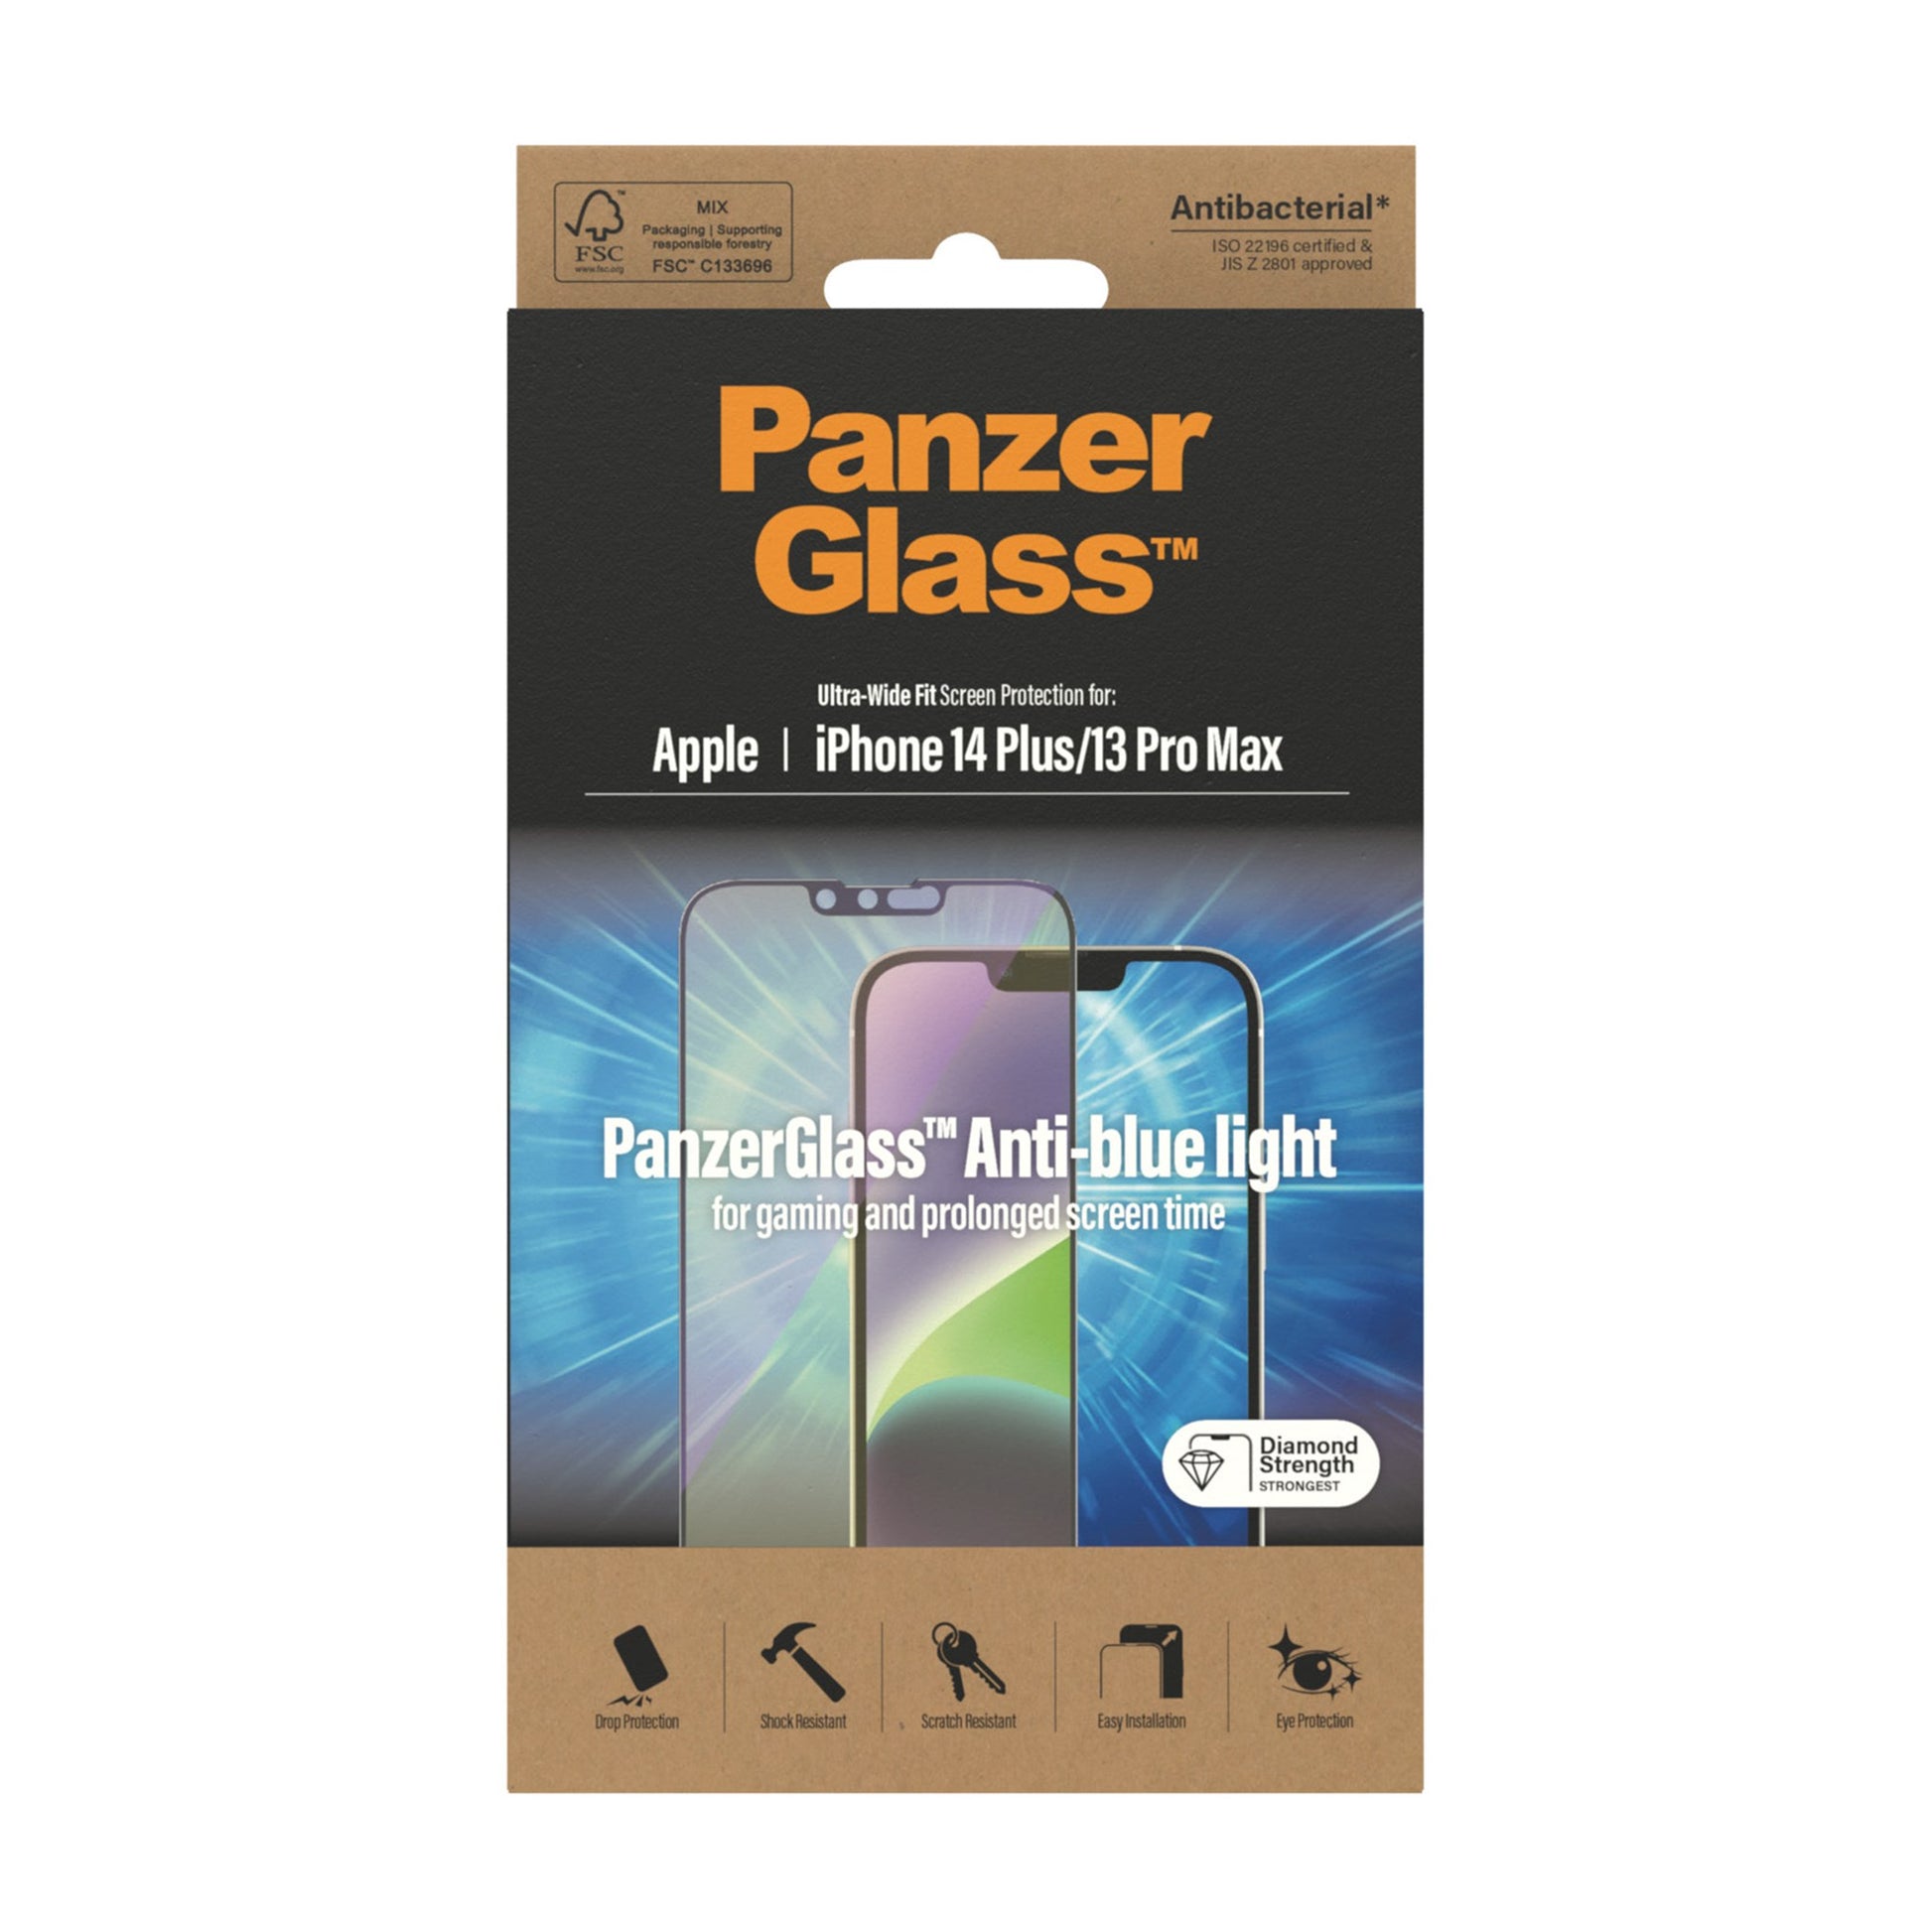 PanzerGlass™ Anti-blue light Screen Protector for Apple iPhone 14 Plus | 13 Pro Max | Ultra-Wide Fit 3